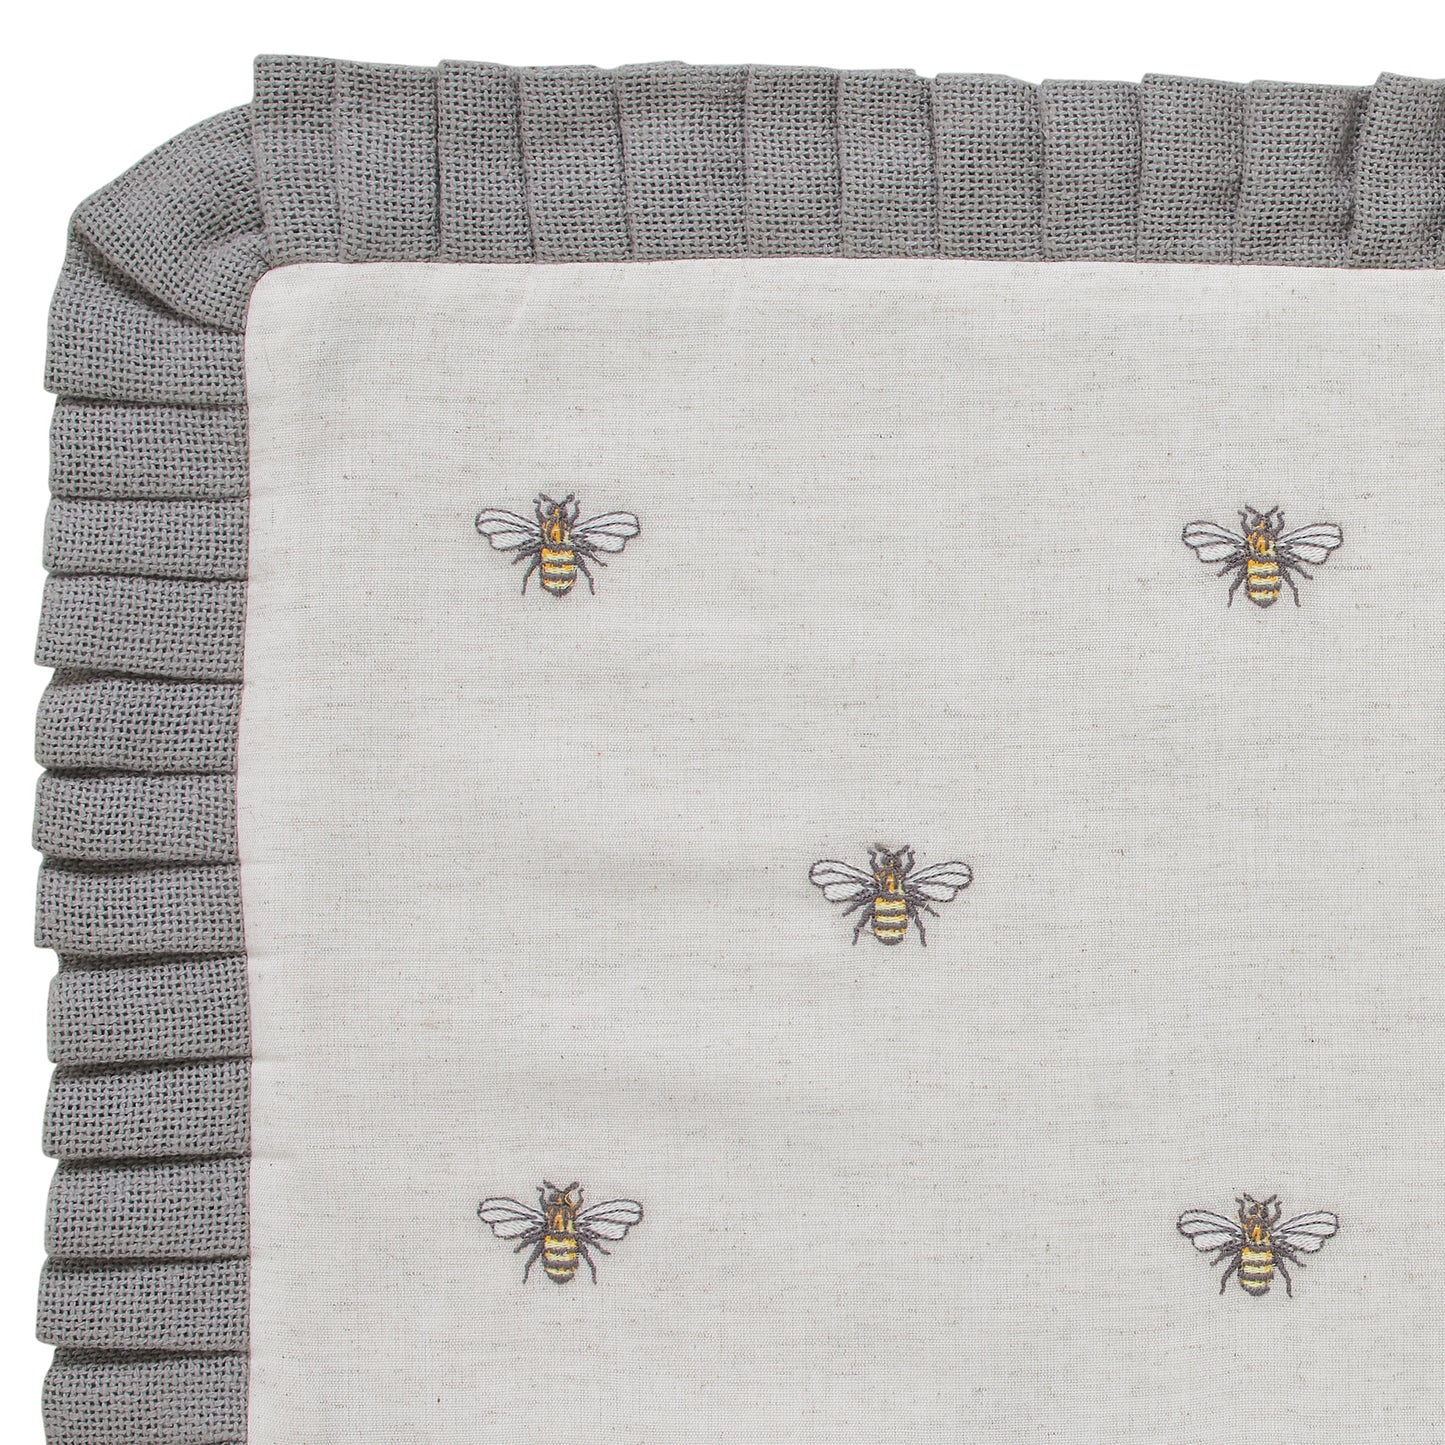 81260-Embroidered-Bee-Pillow-14x22-image-4